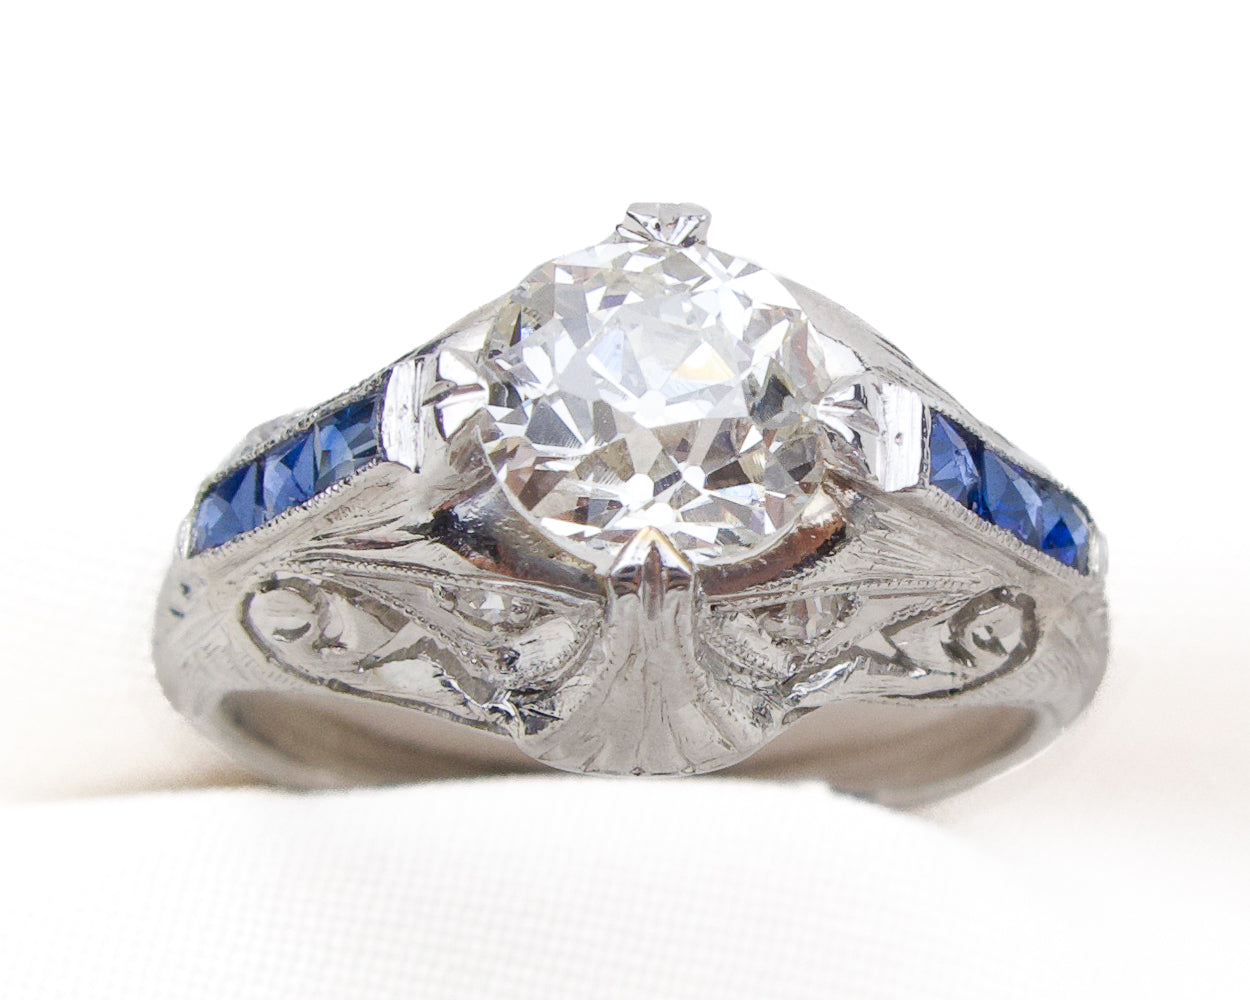 Art Deco Diamond Ring with Synthetic Sapphire Accents